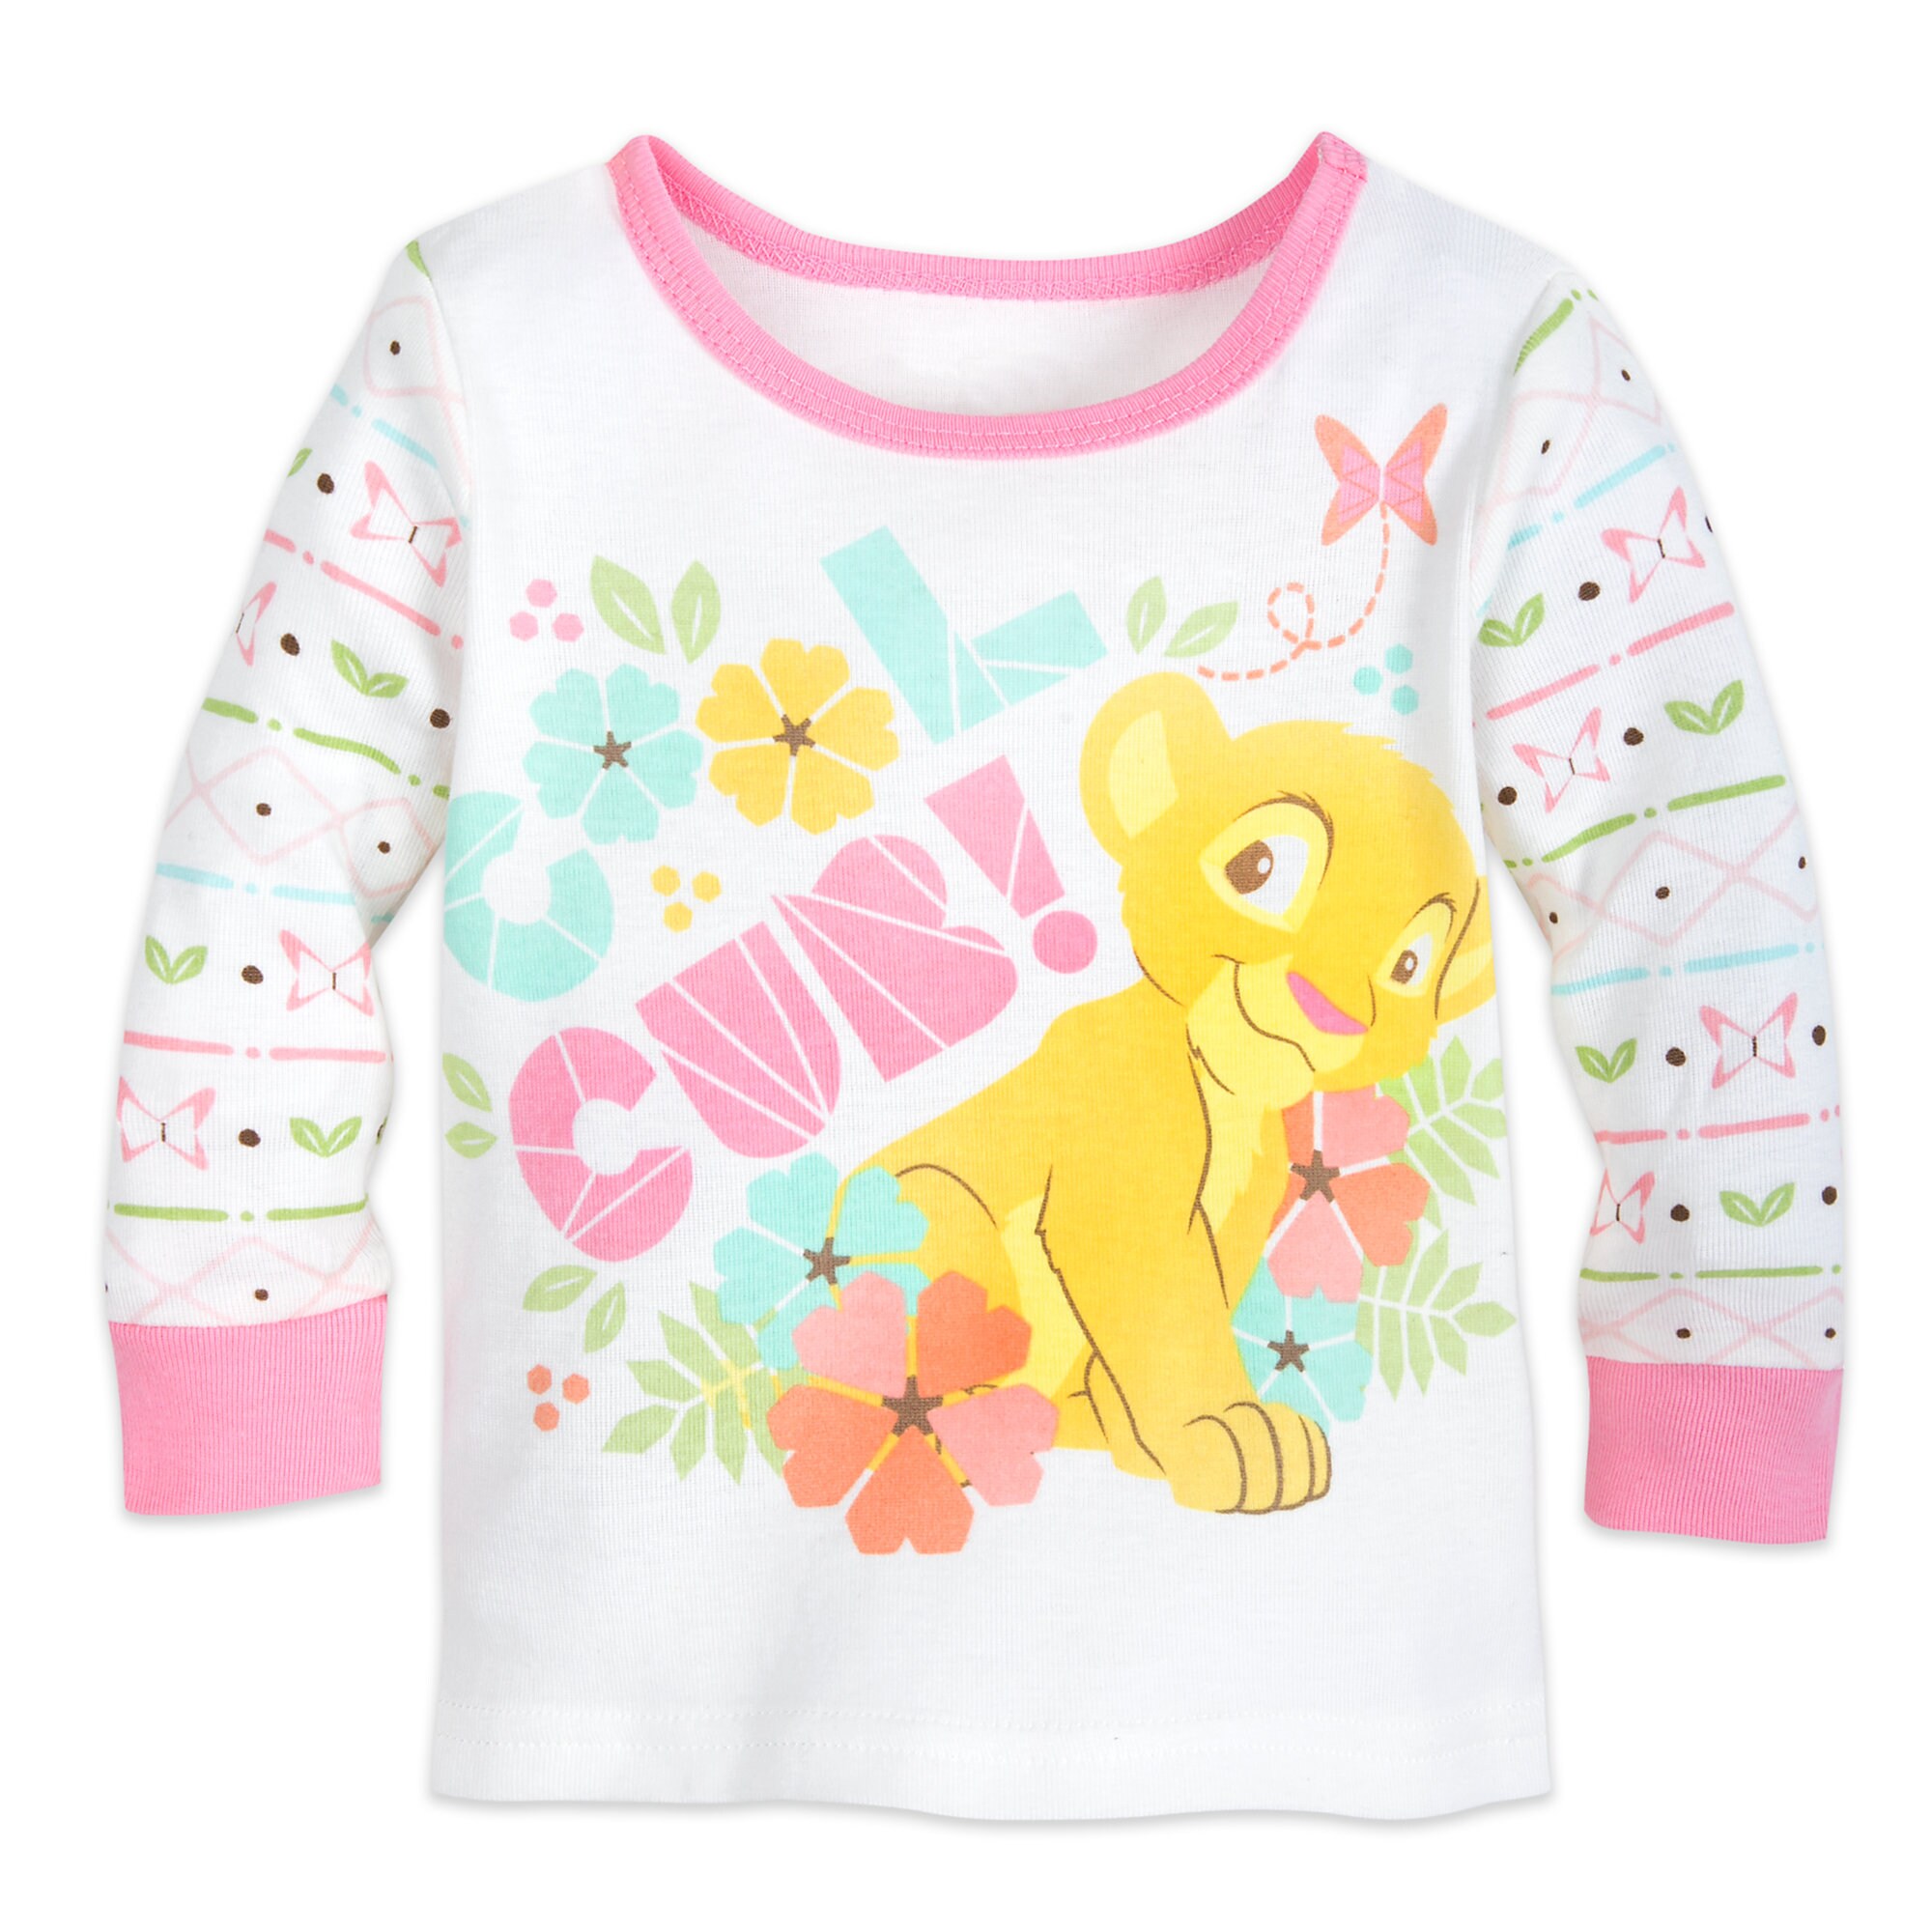 Nala PJ PALS for Baby - The Lion King